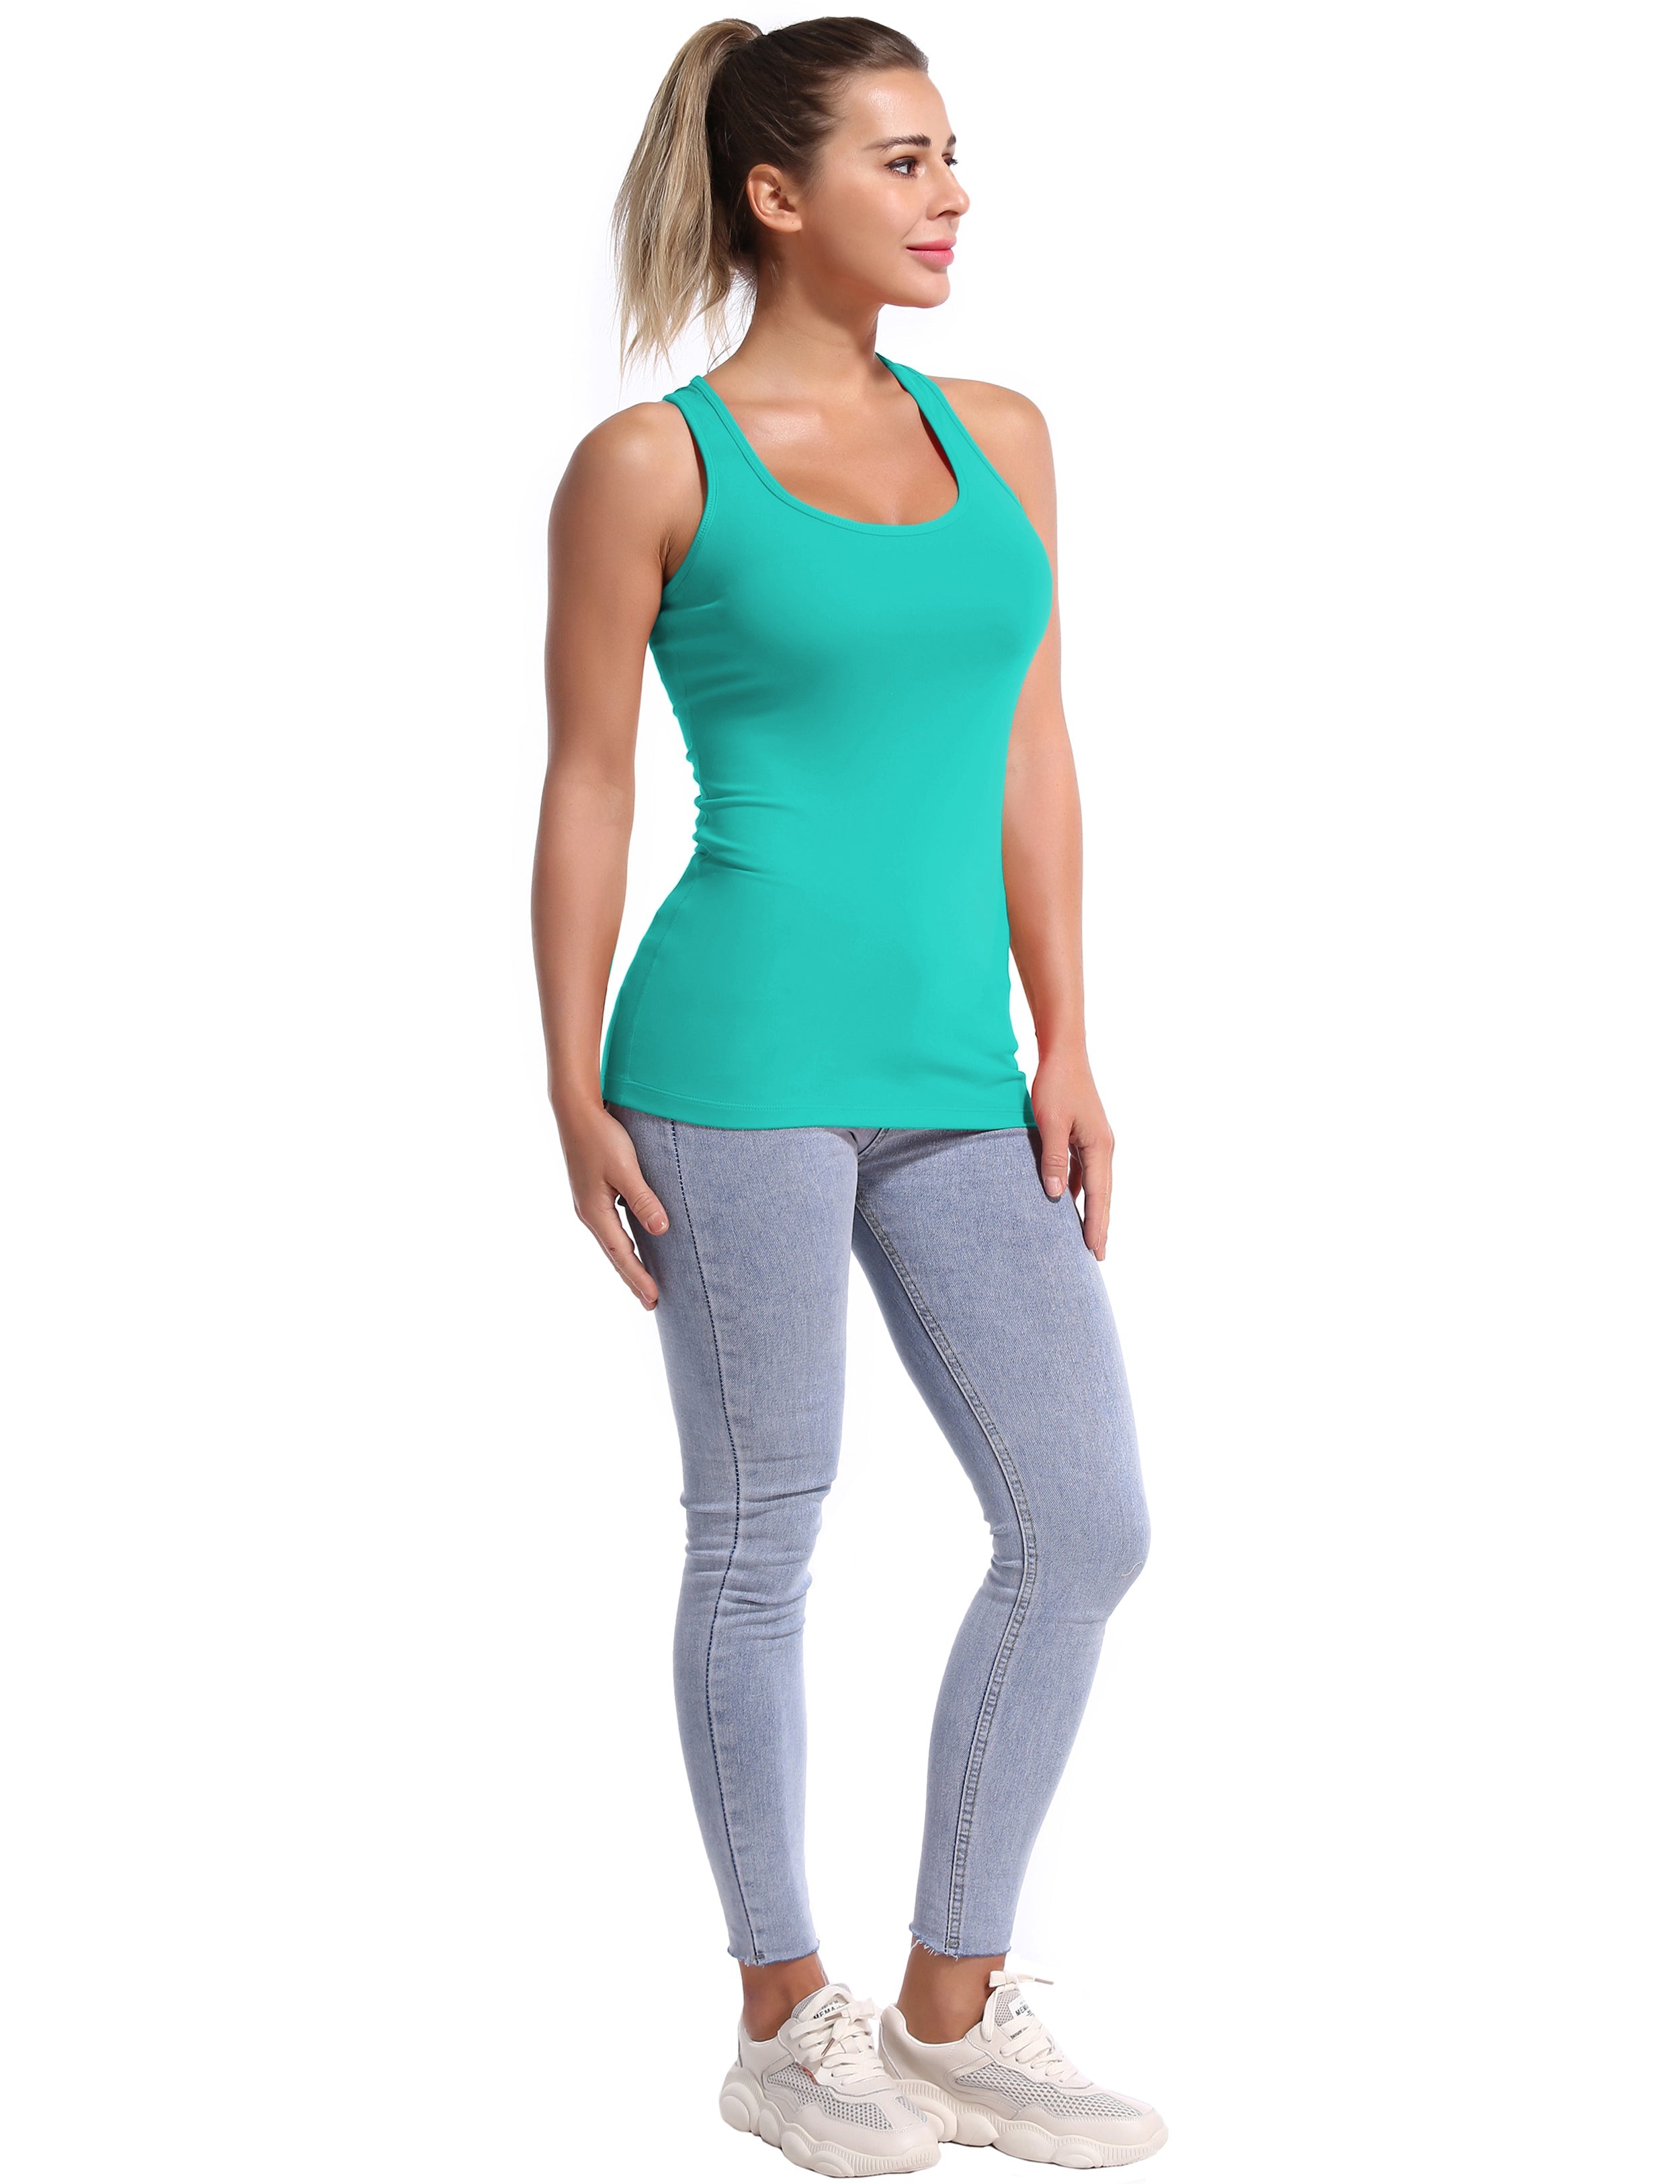 Racerback Athletic Tank Tops cyan 92%Nylon/8%Spandex(Cotton Soft) Designed for Jogging Tight Fit So buttery soft, it feels weightless Sweat-wicking Four-way stretch Breathable Contours your body Sits below the waistband for moderate, everyday coverage